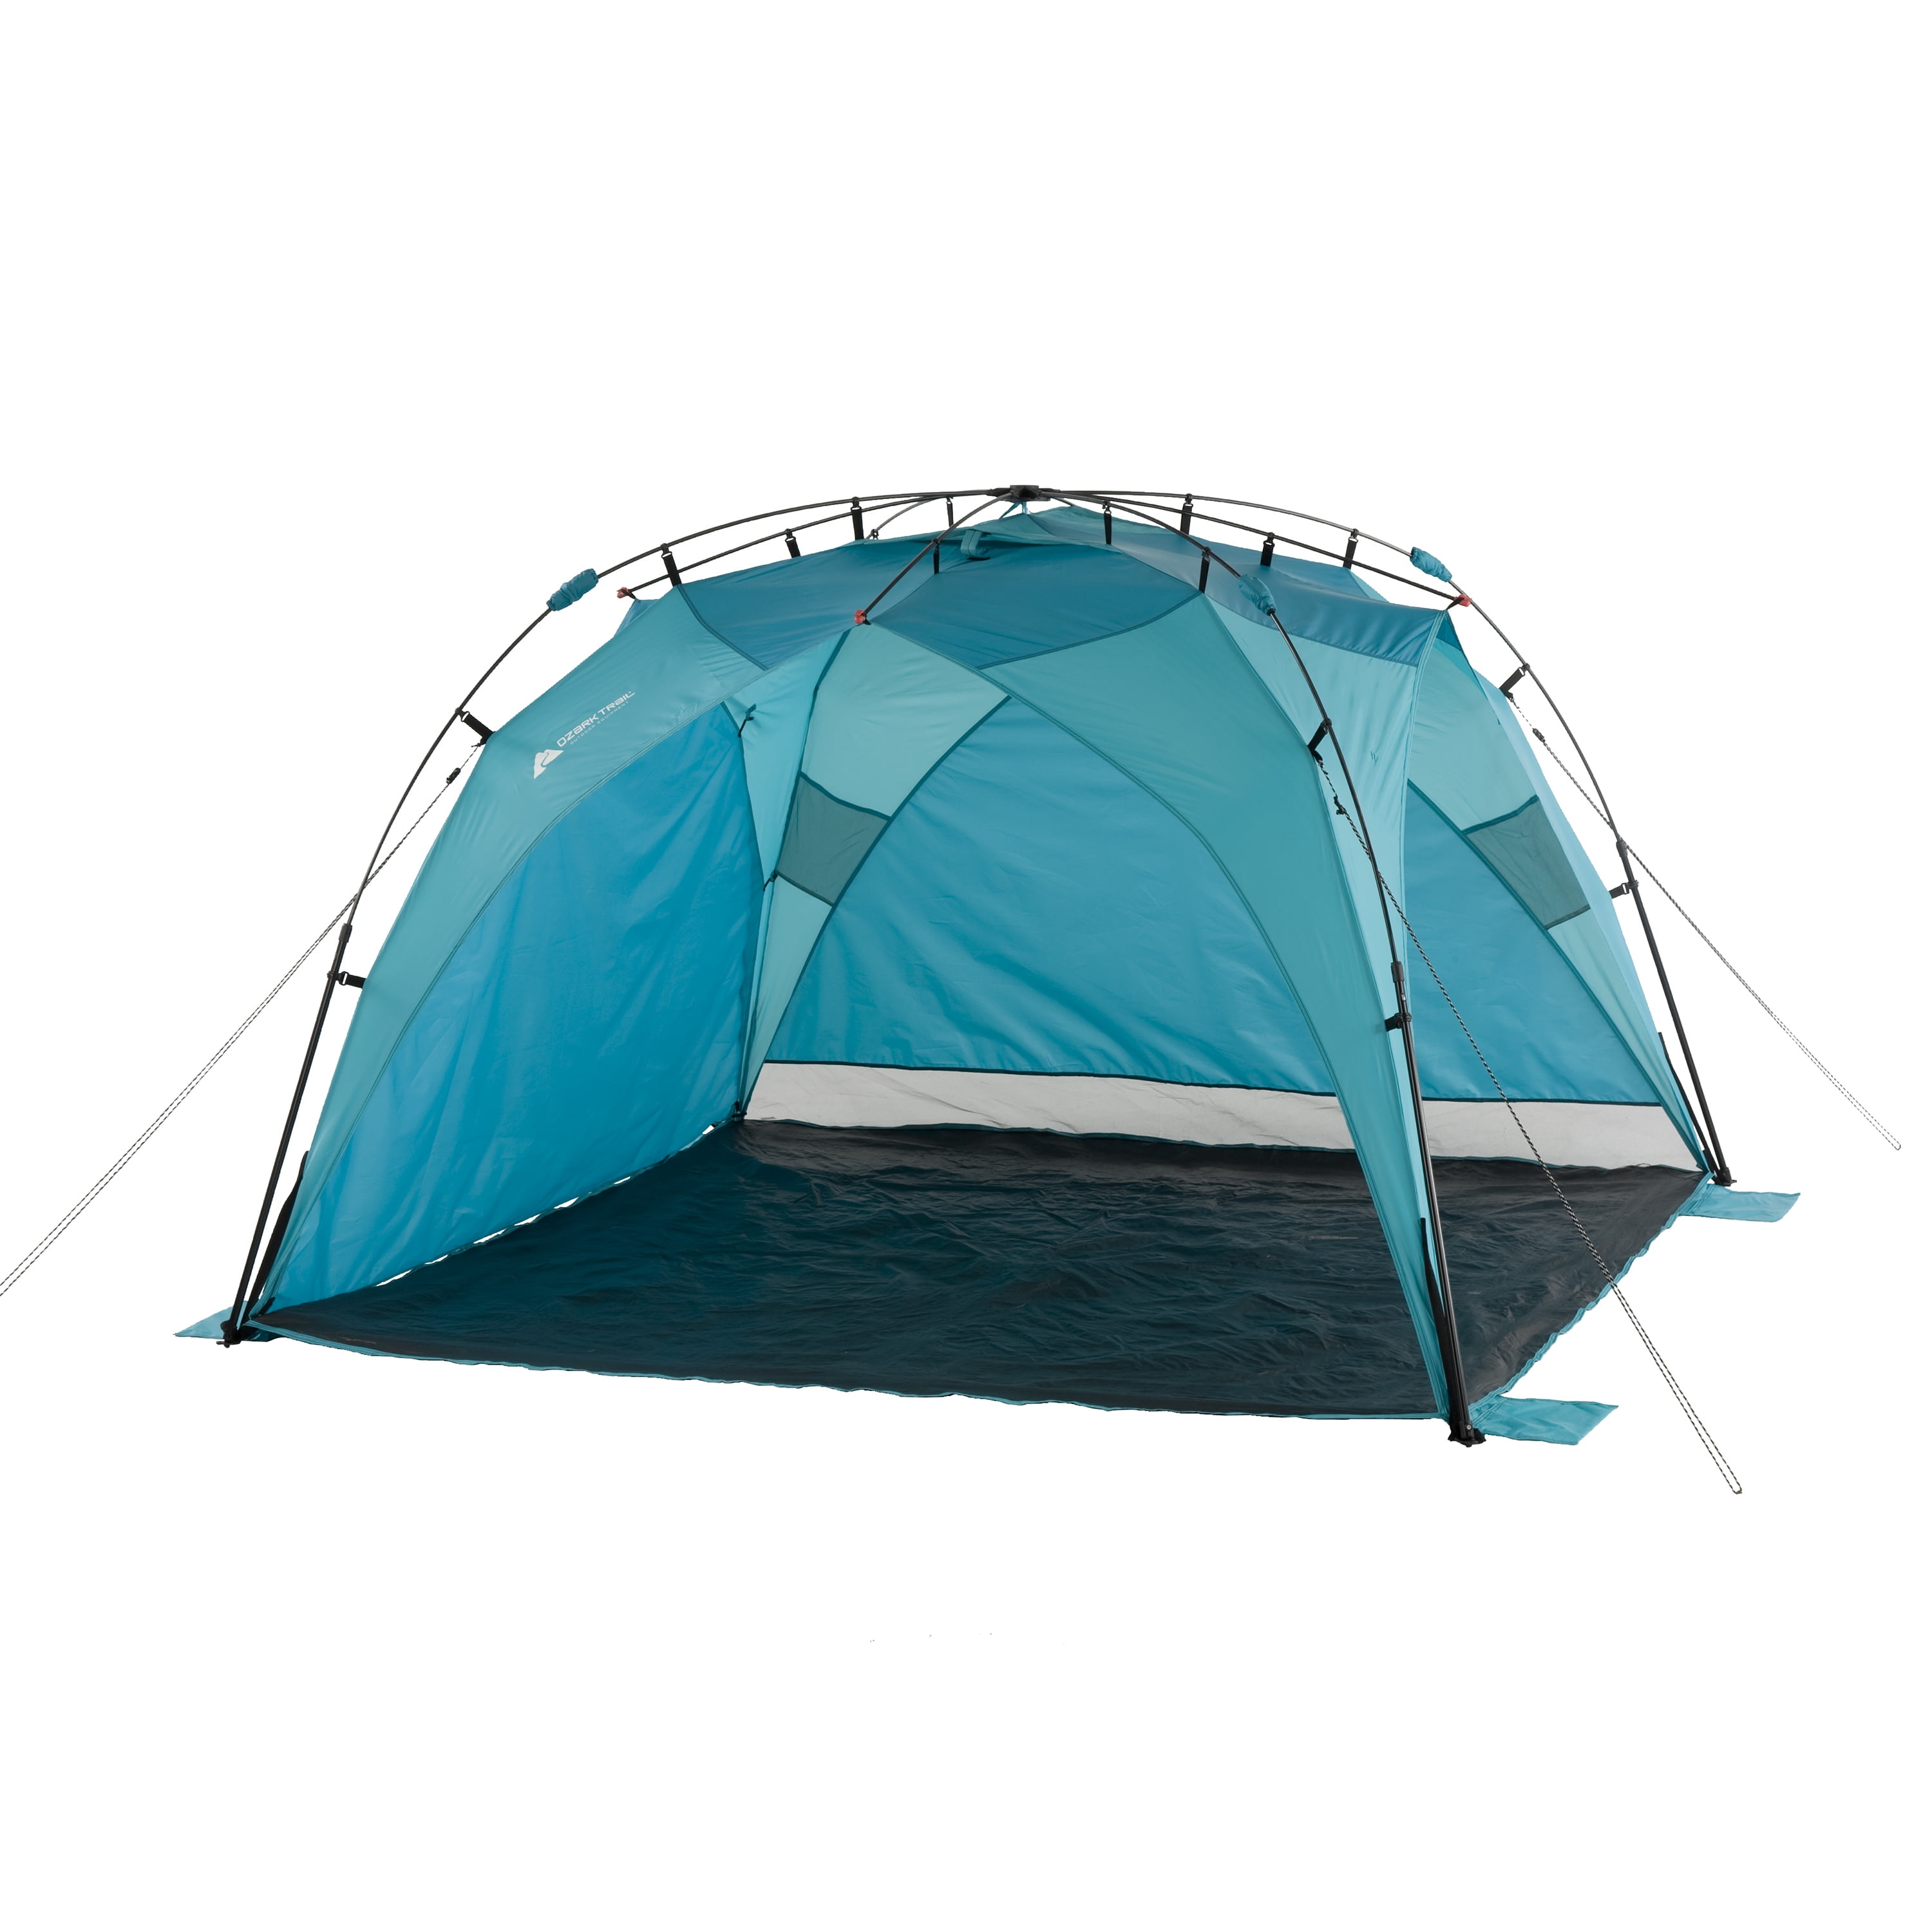 Ozark Trail 8' x 8' Instant Sun Shade (64 Sq. Ft. Coverage, Blue) $49 + Free Shipping